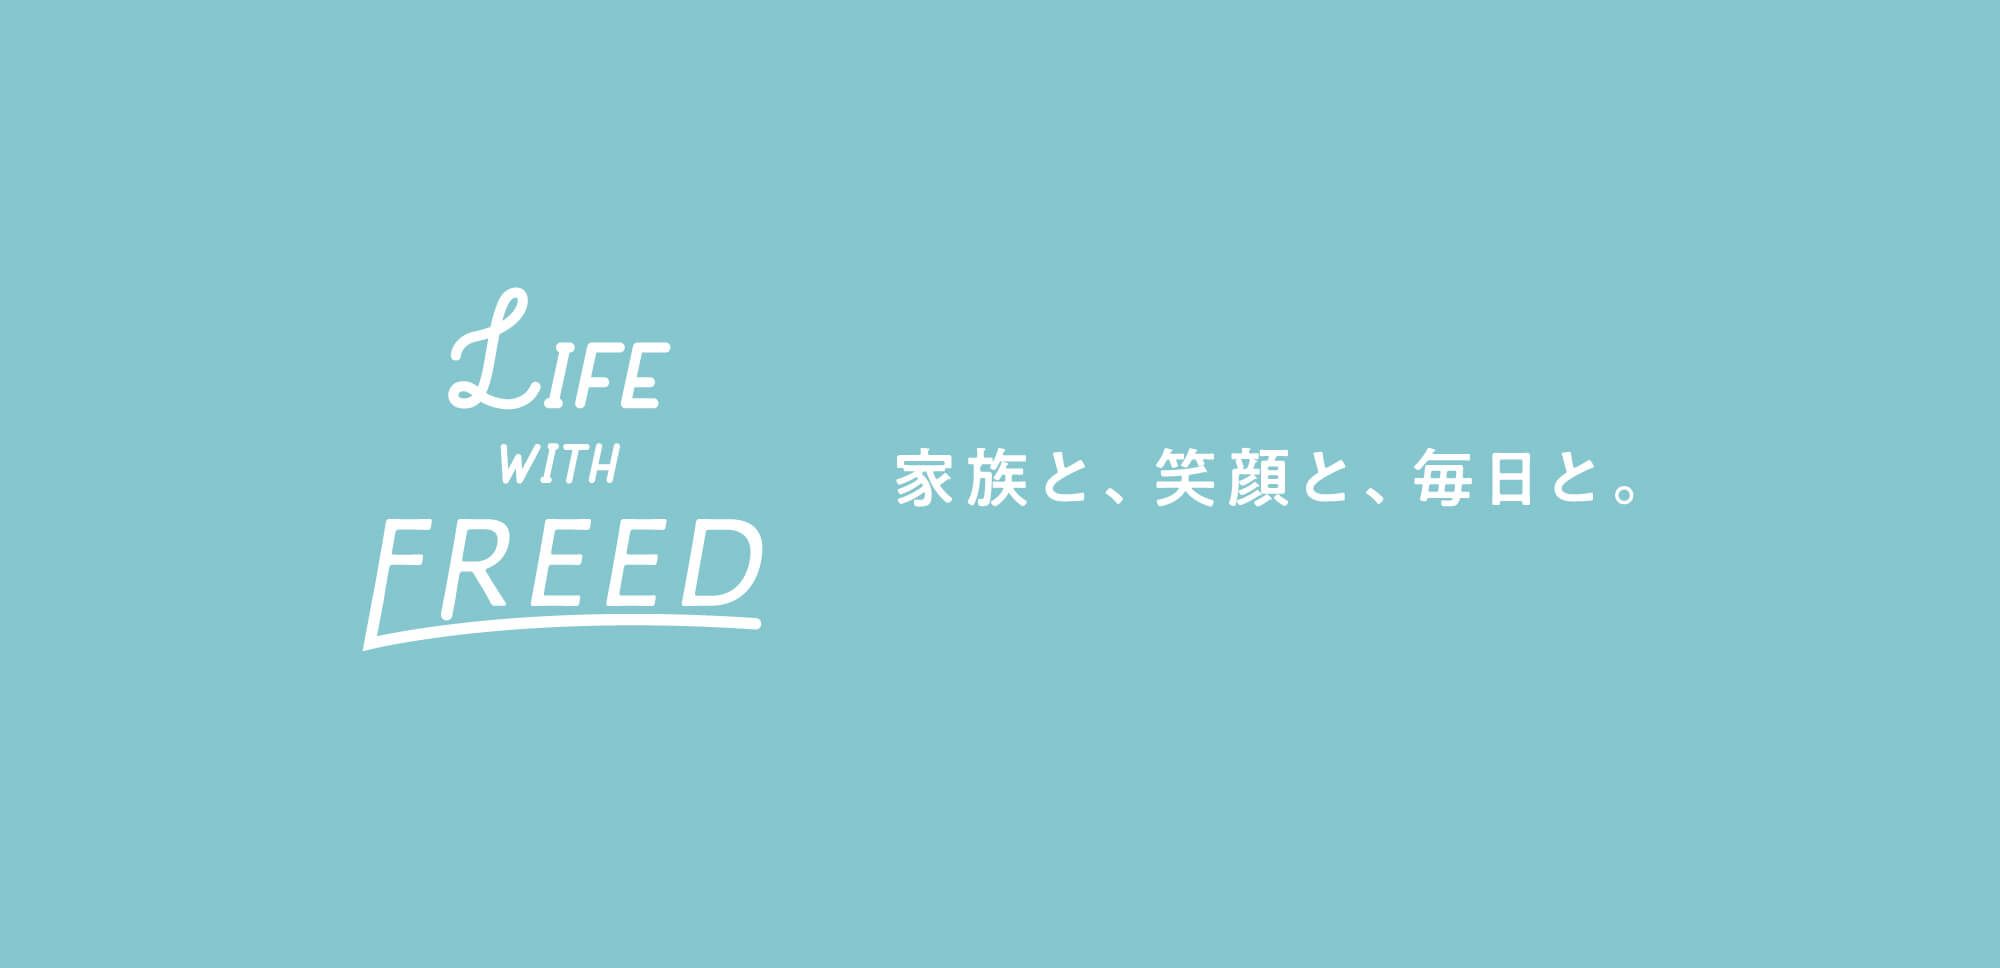 LIFE WITH FREED 家族と、笑顔と、毎日と。